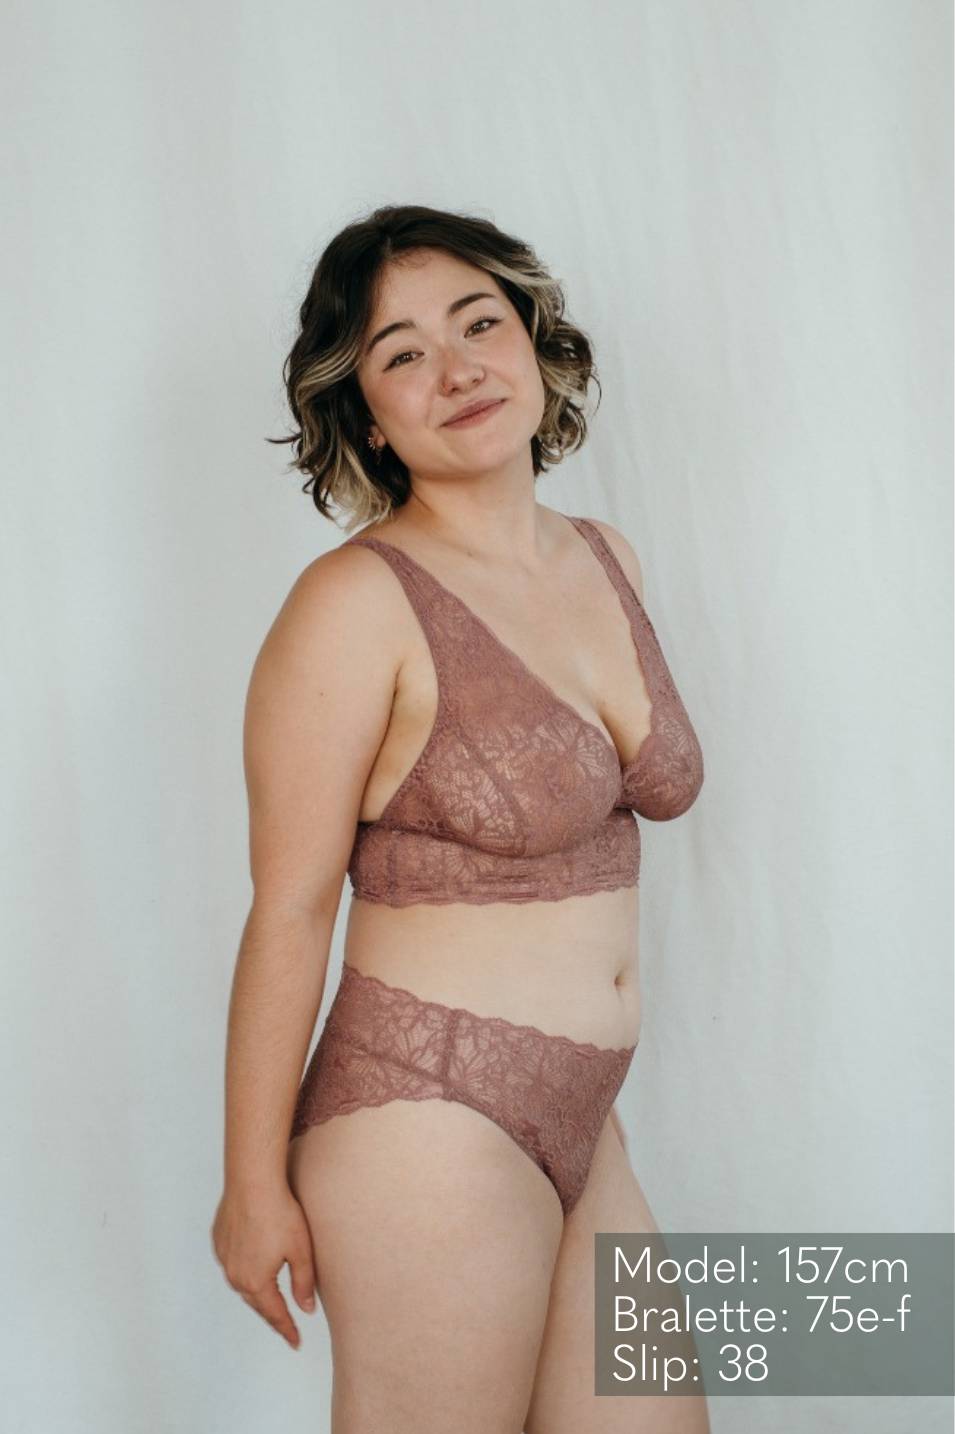 Bralette e slip di thoughts of september in un bellissimo colore rosa fumé.